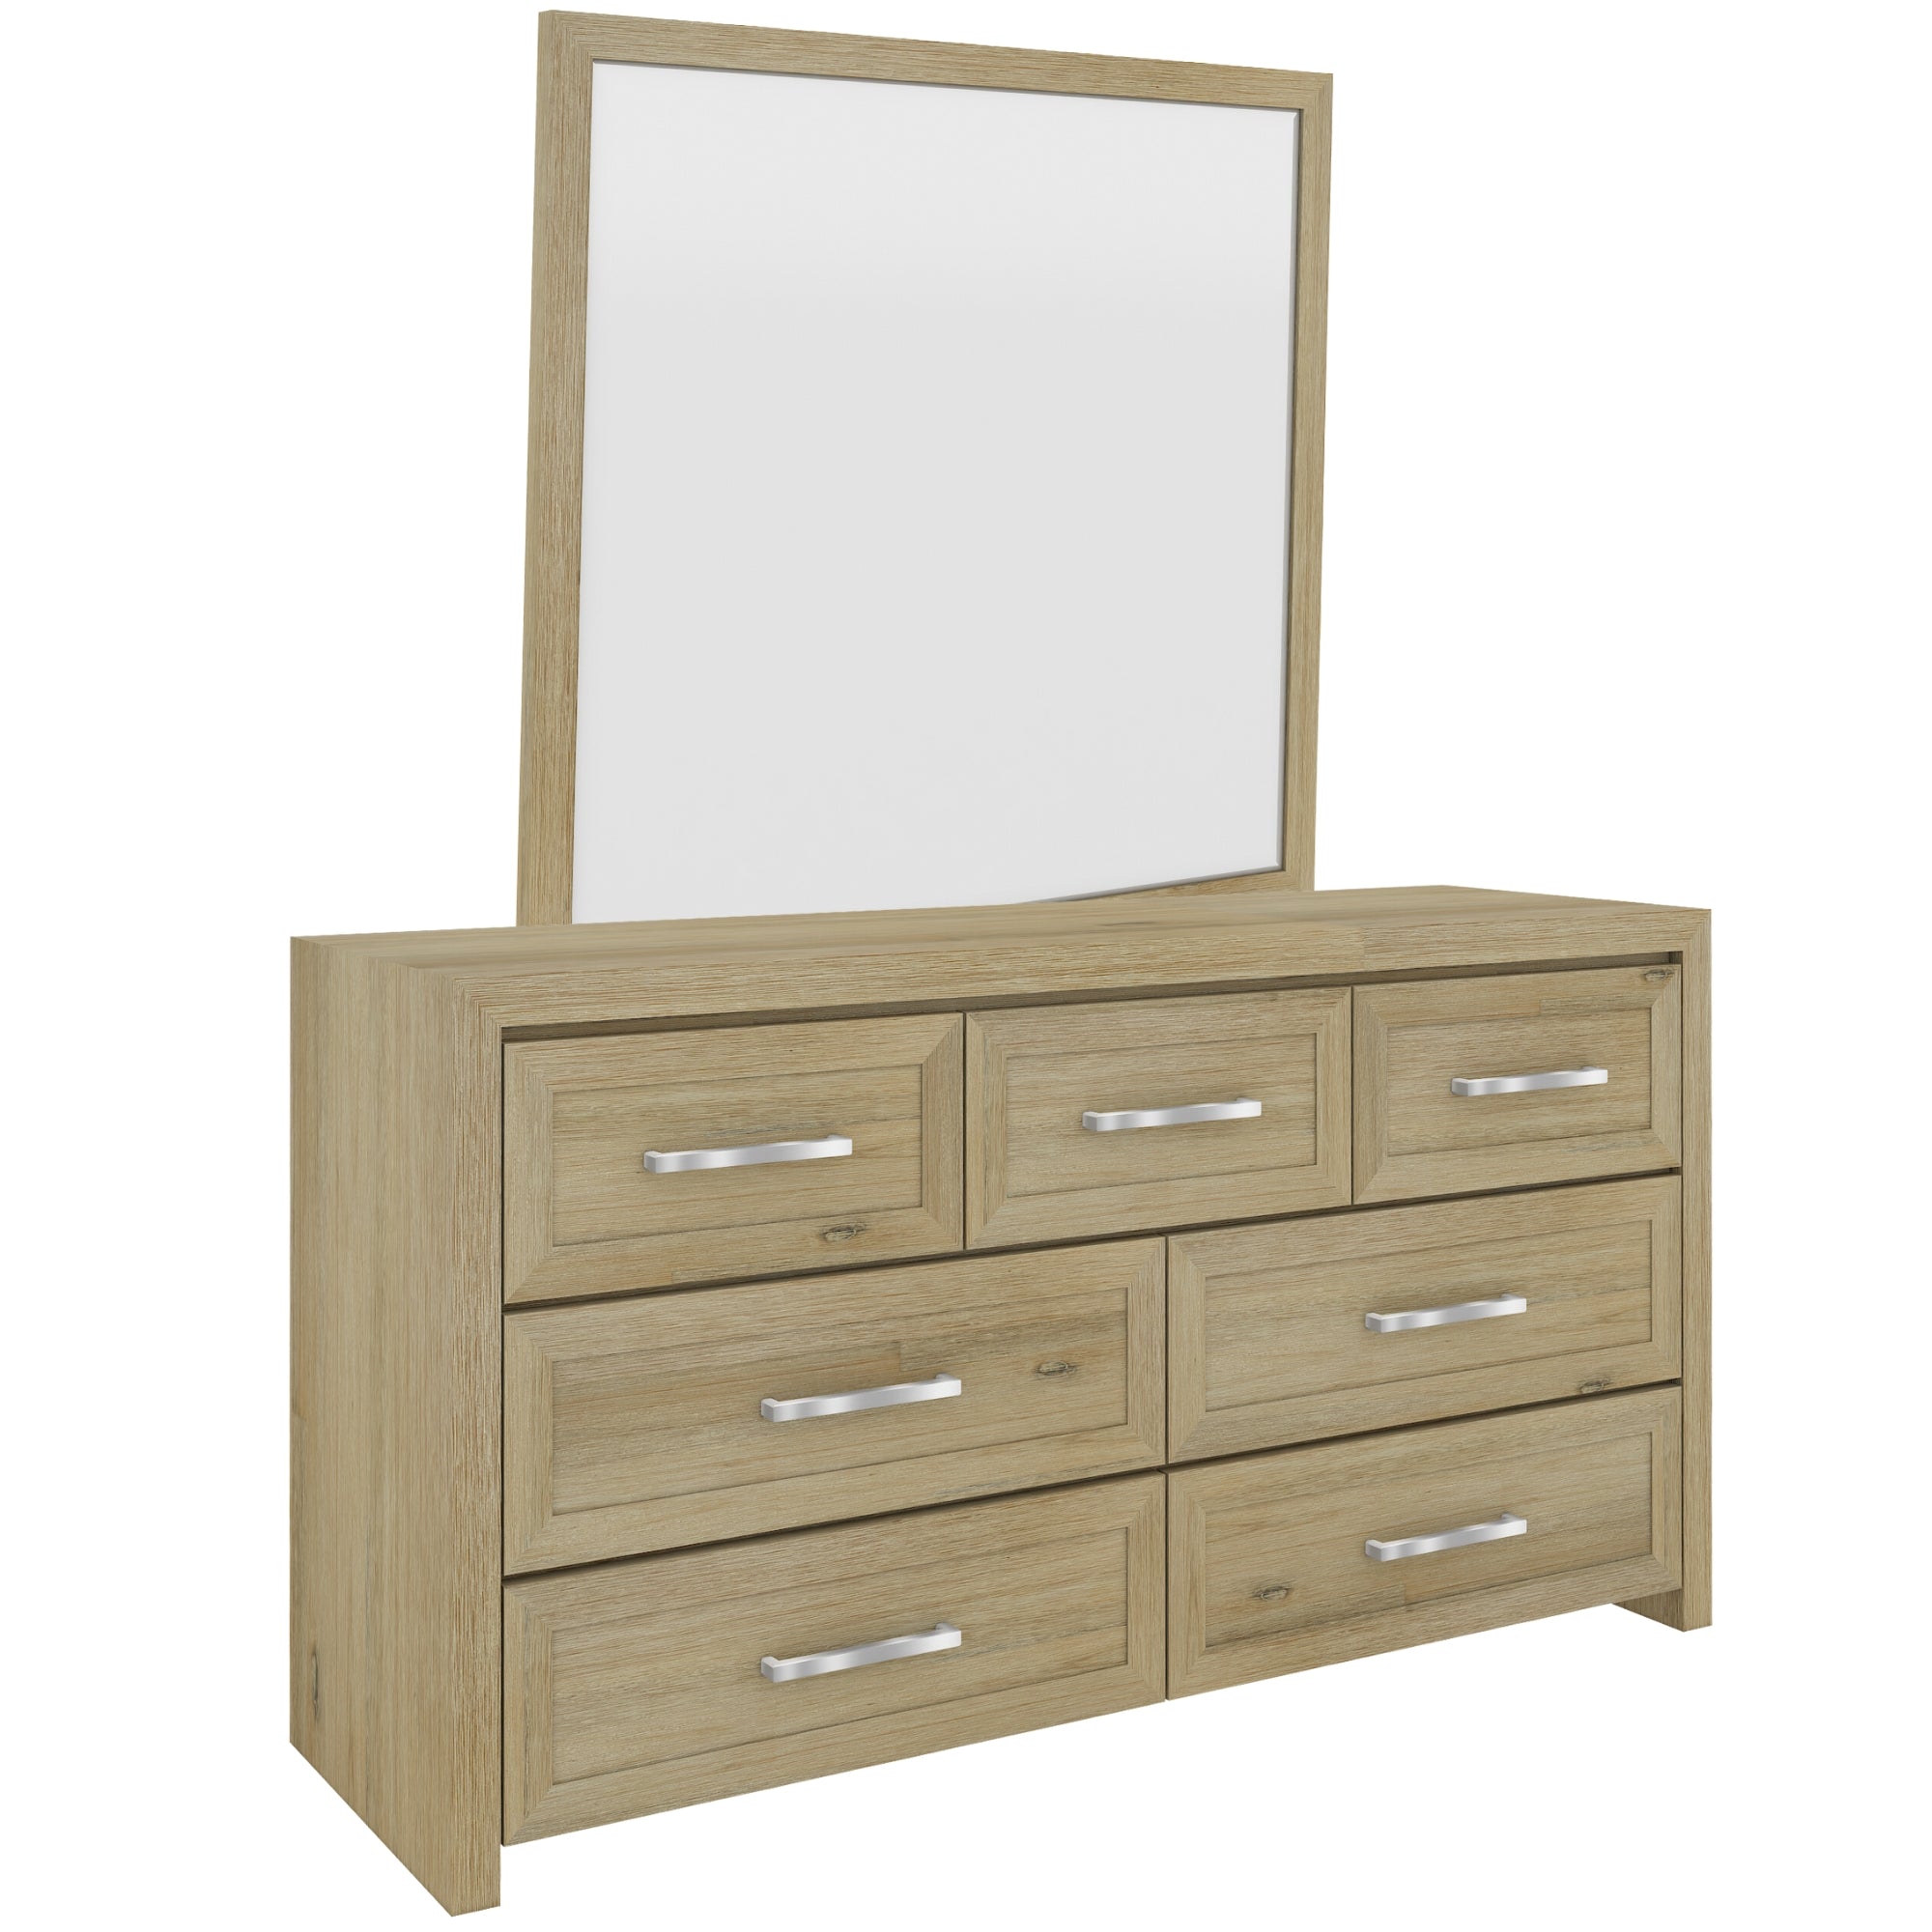 No Assembly Required on this Dresser and Mirror With Seven Drawers  - Solid Wood in Smoke